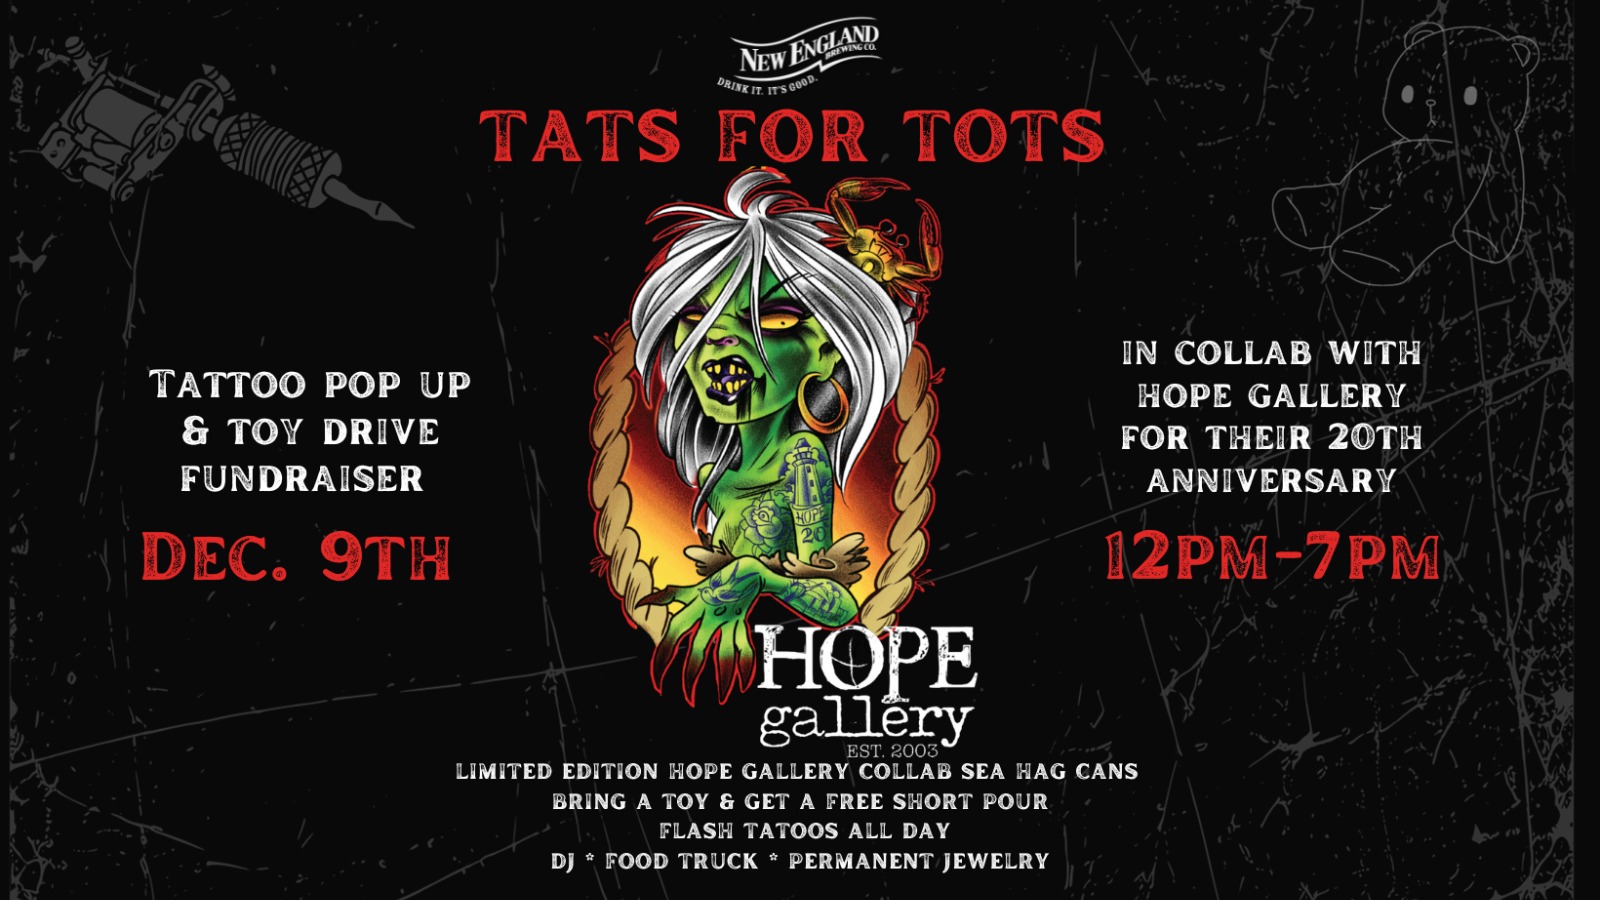 Tattoo Pop Up & Toy Drive Fundraiser in Collaboration with Hope Gallery for their 20th Anniversary Event Photo